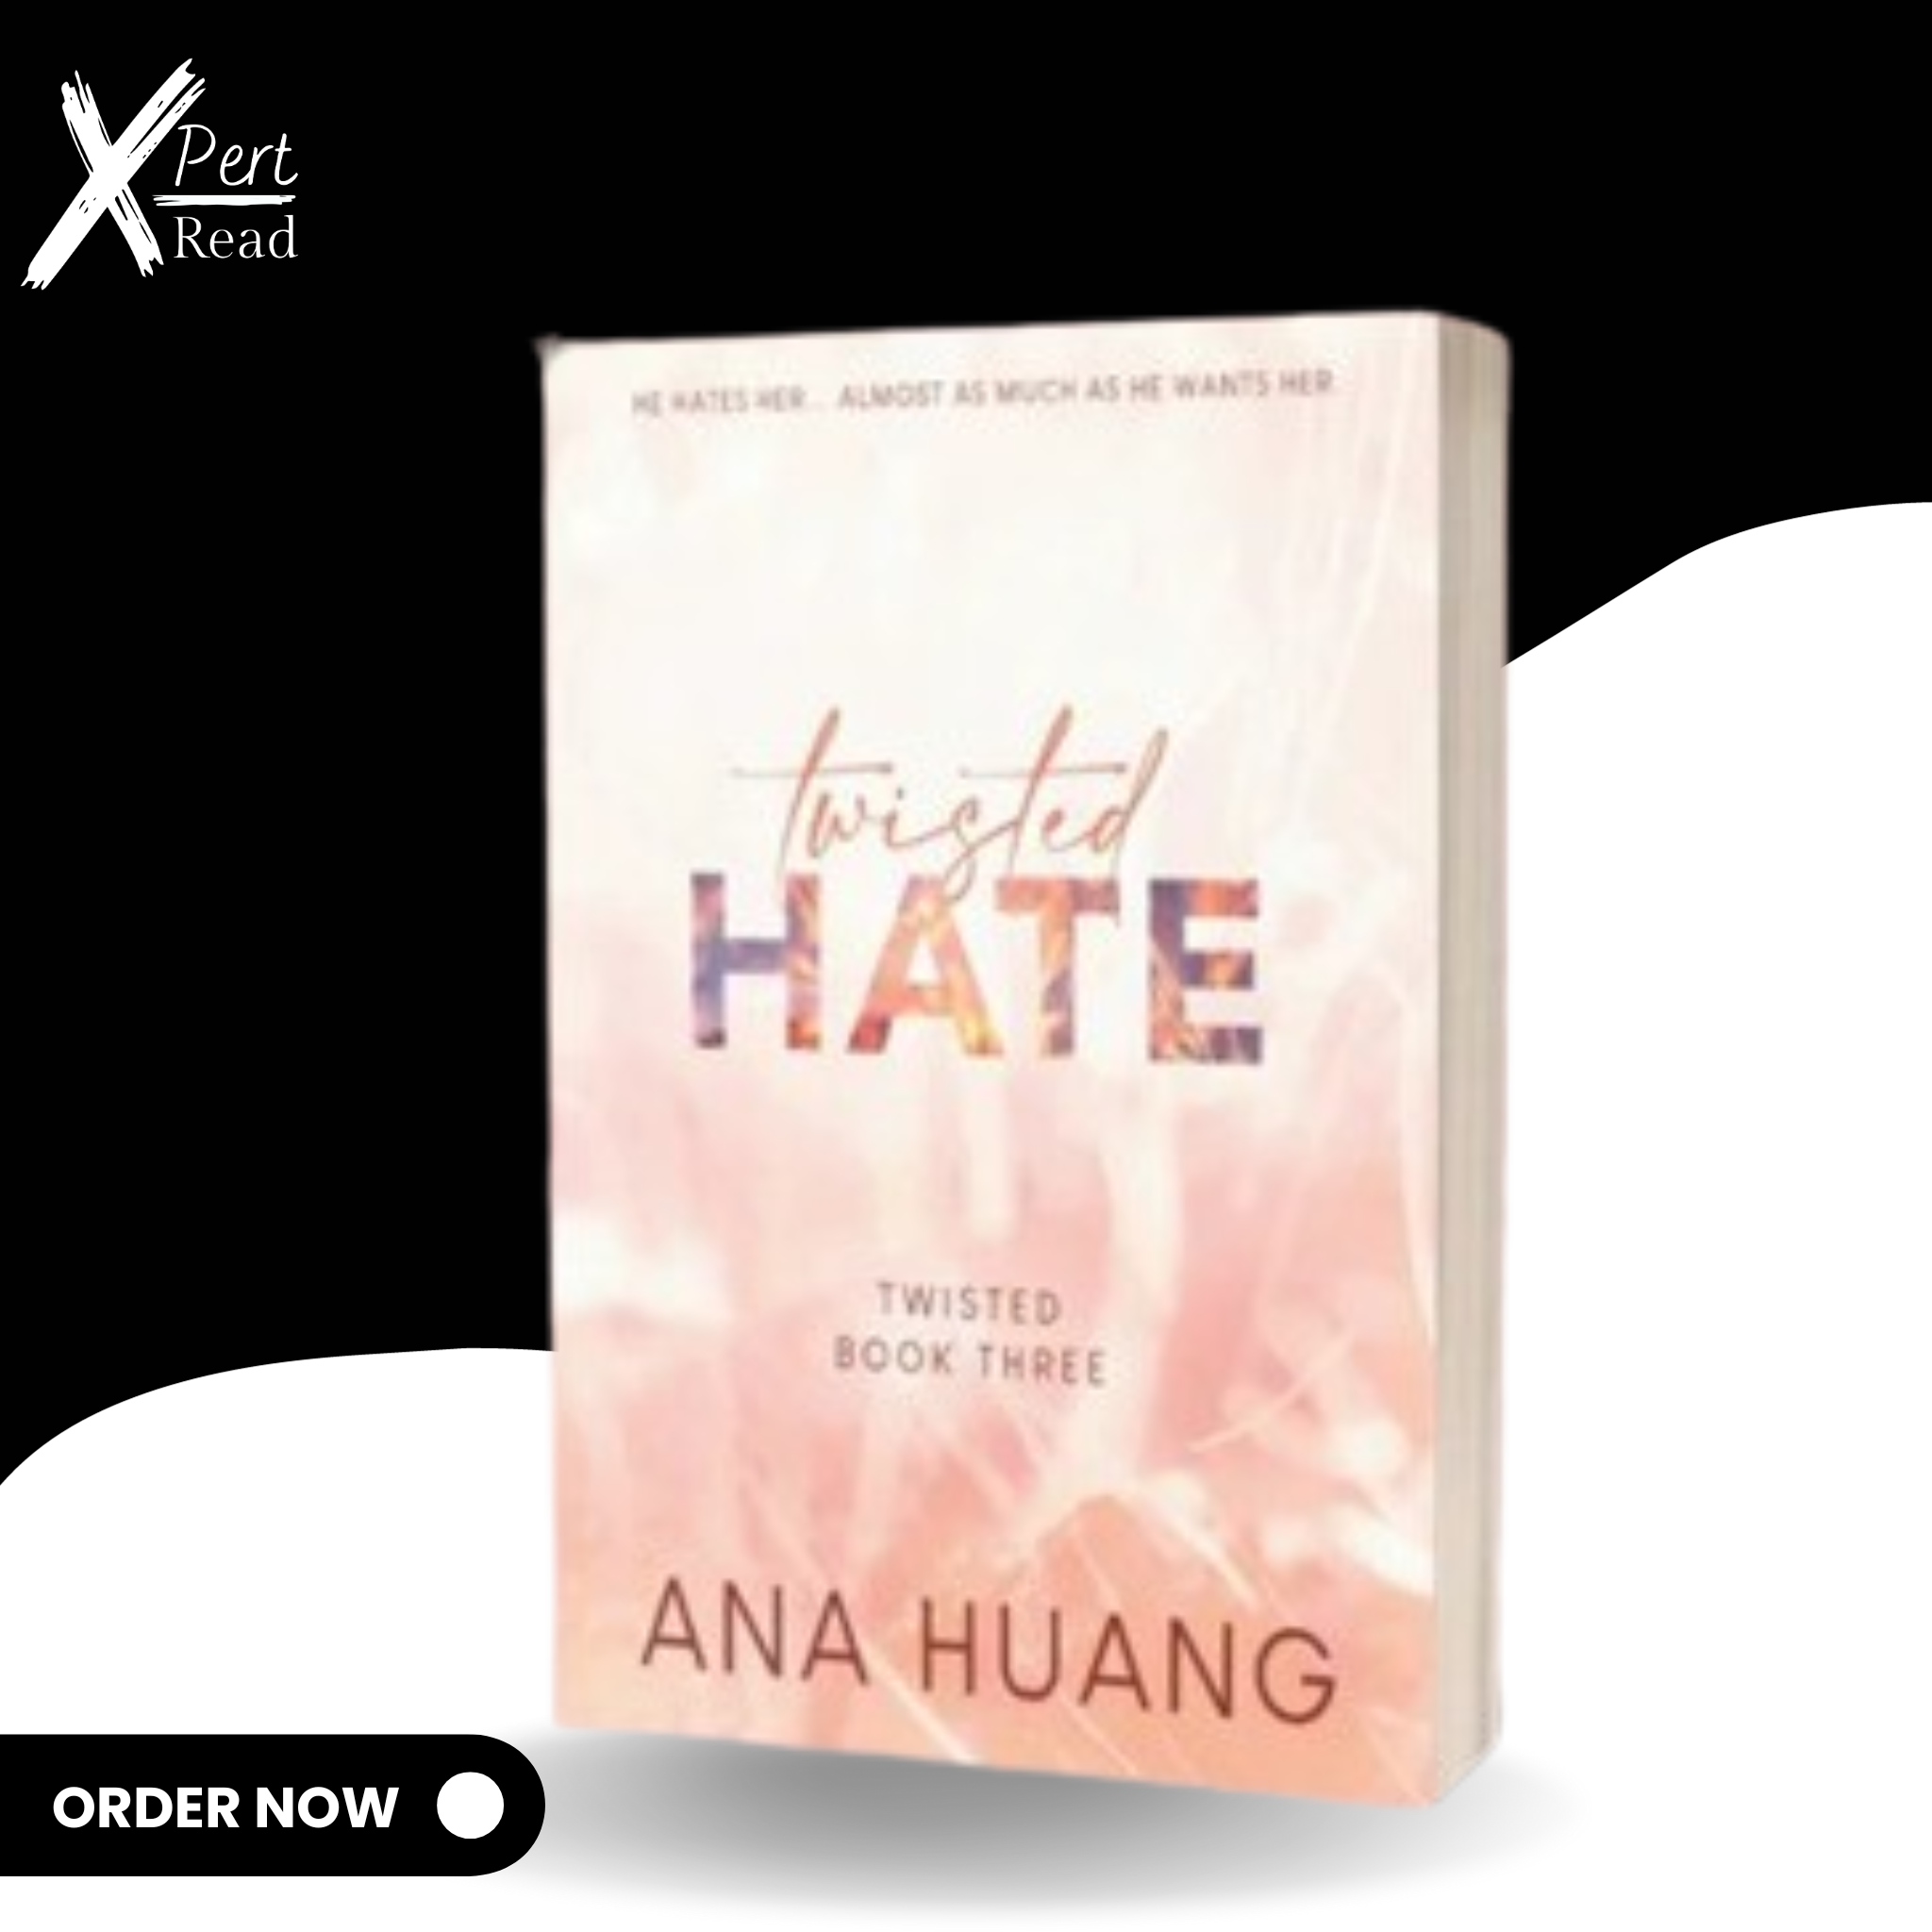 Twisted Hate - (Twisted Series Book 3 Of 4) By Ana Huang